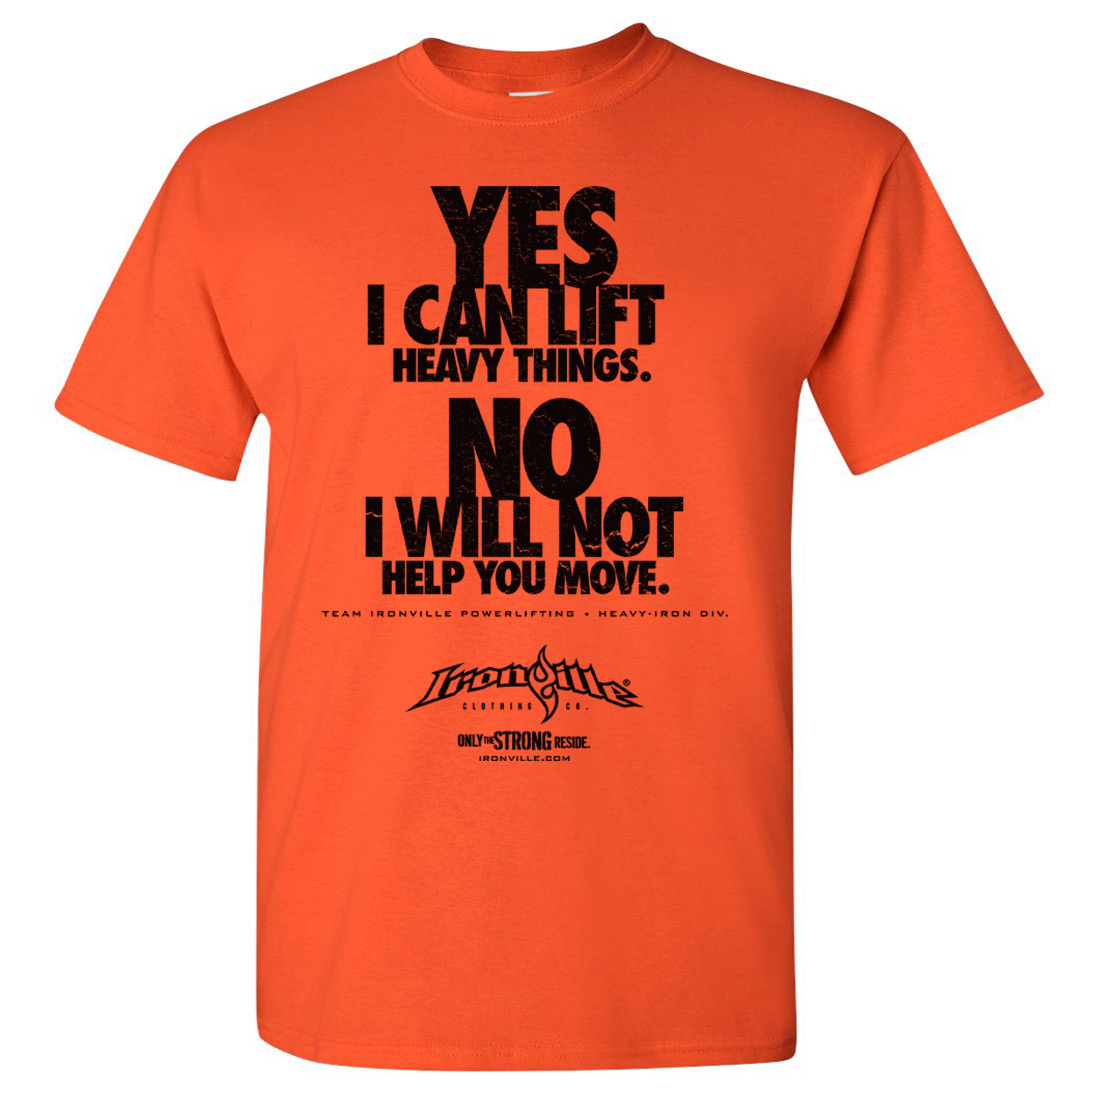 https://www.ironville.com/wp-content/uploads/2023/02/yes-i-can-lift-heavy-things-no-i-will-not-help-you-move-powerlifting-gym-t-shirt-orange-front.jpg